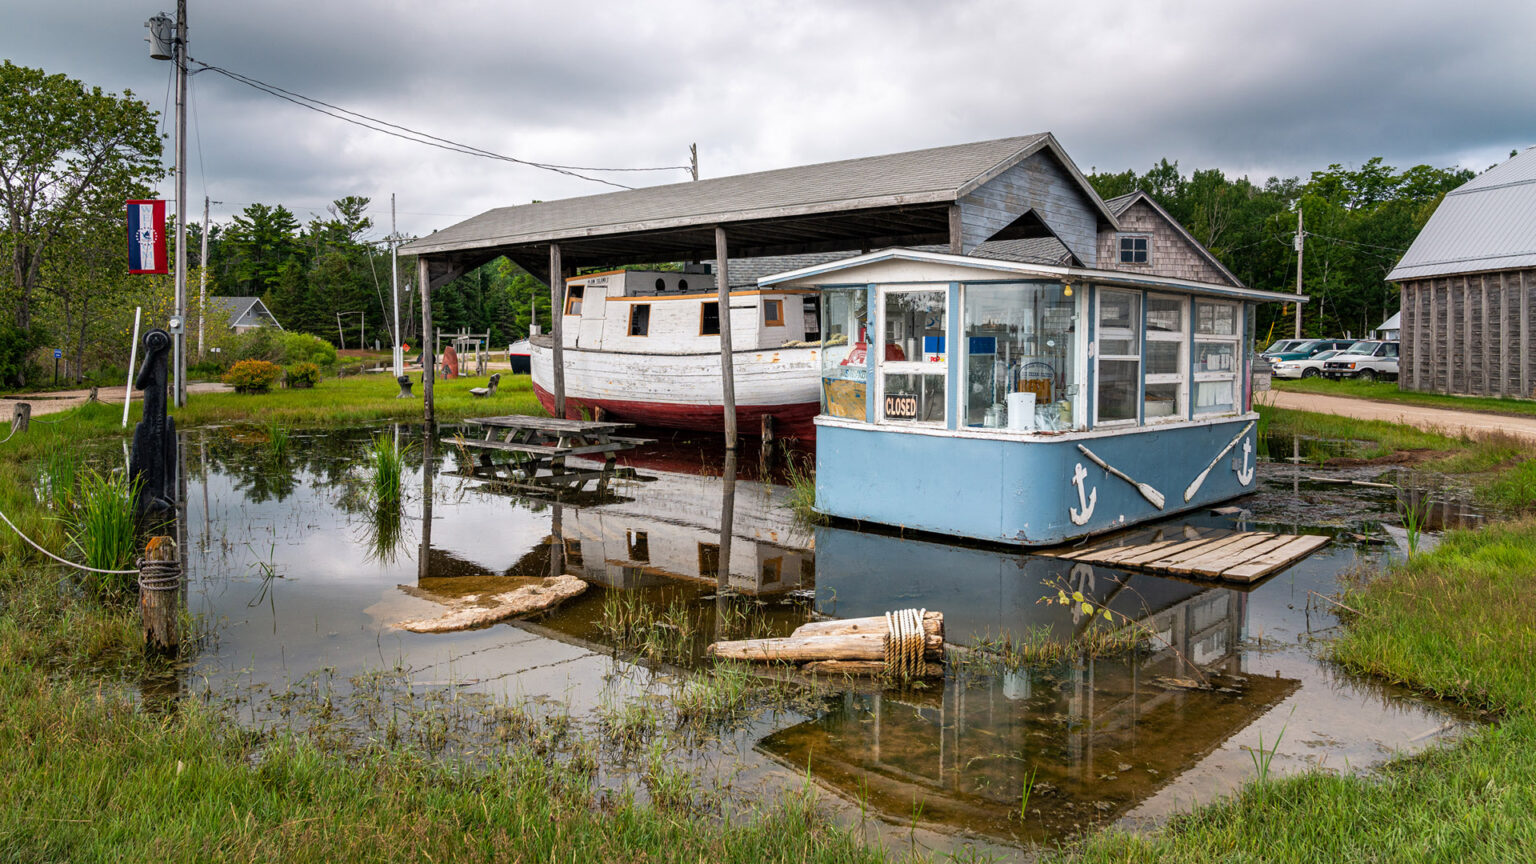 Flood waters surround a pier area with a small vendor building and wooden boat under a covered shelter.